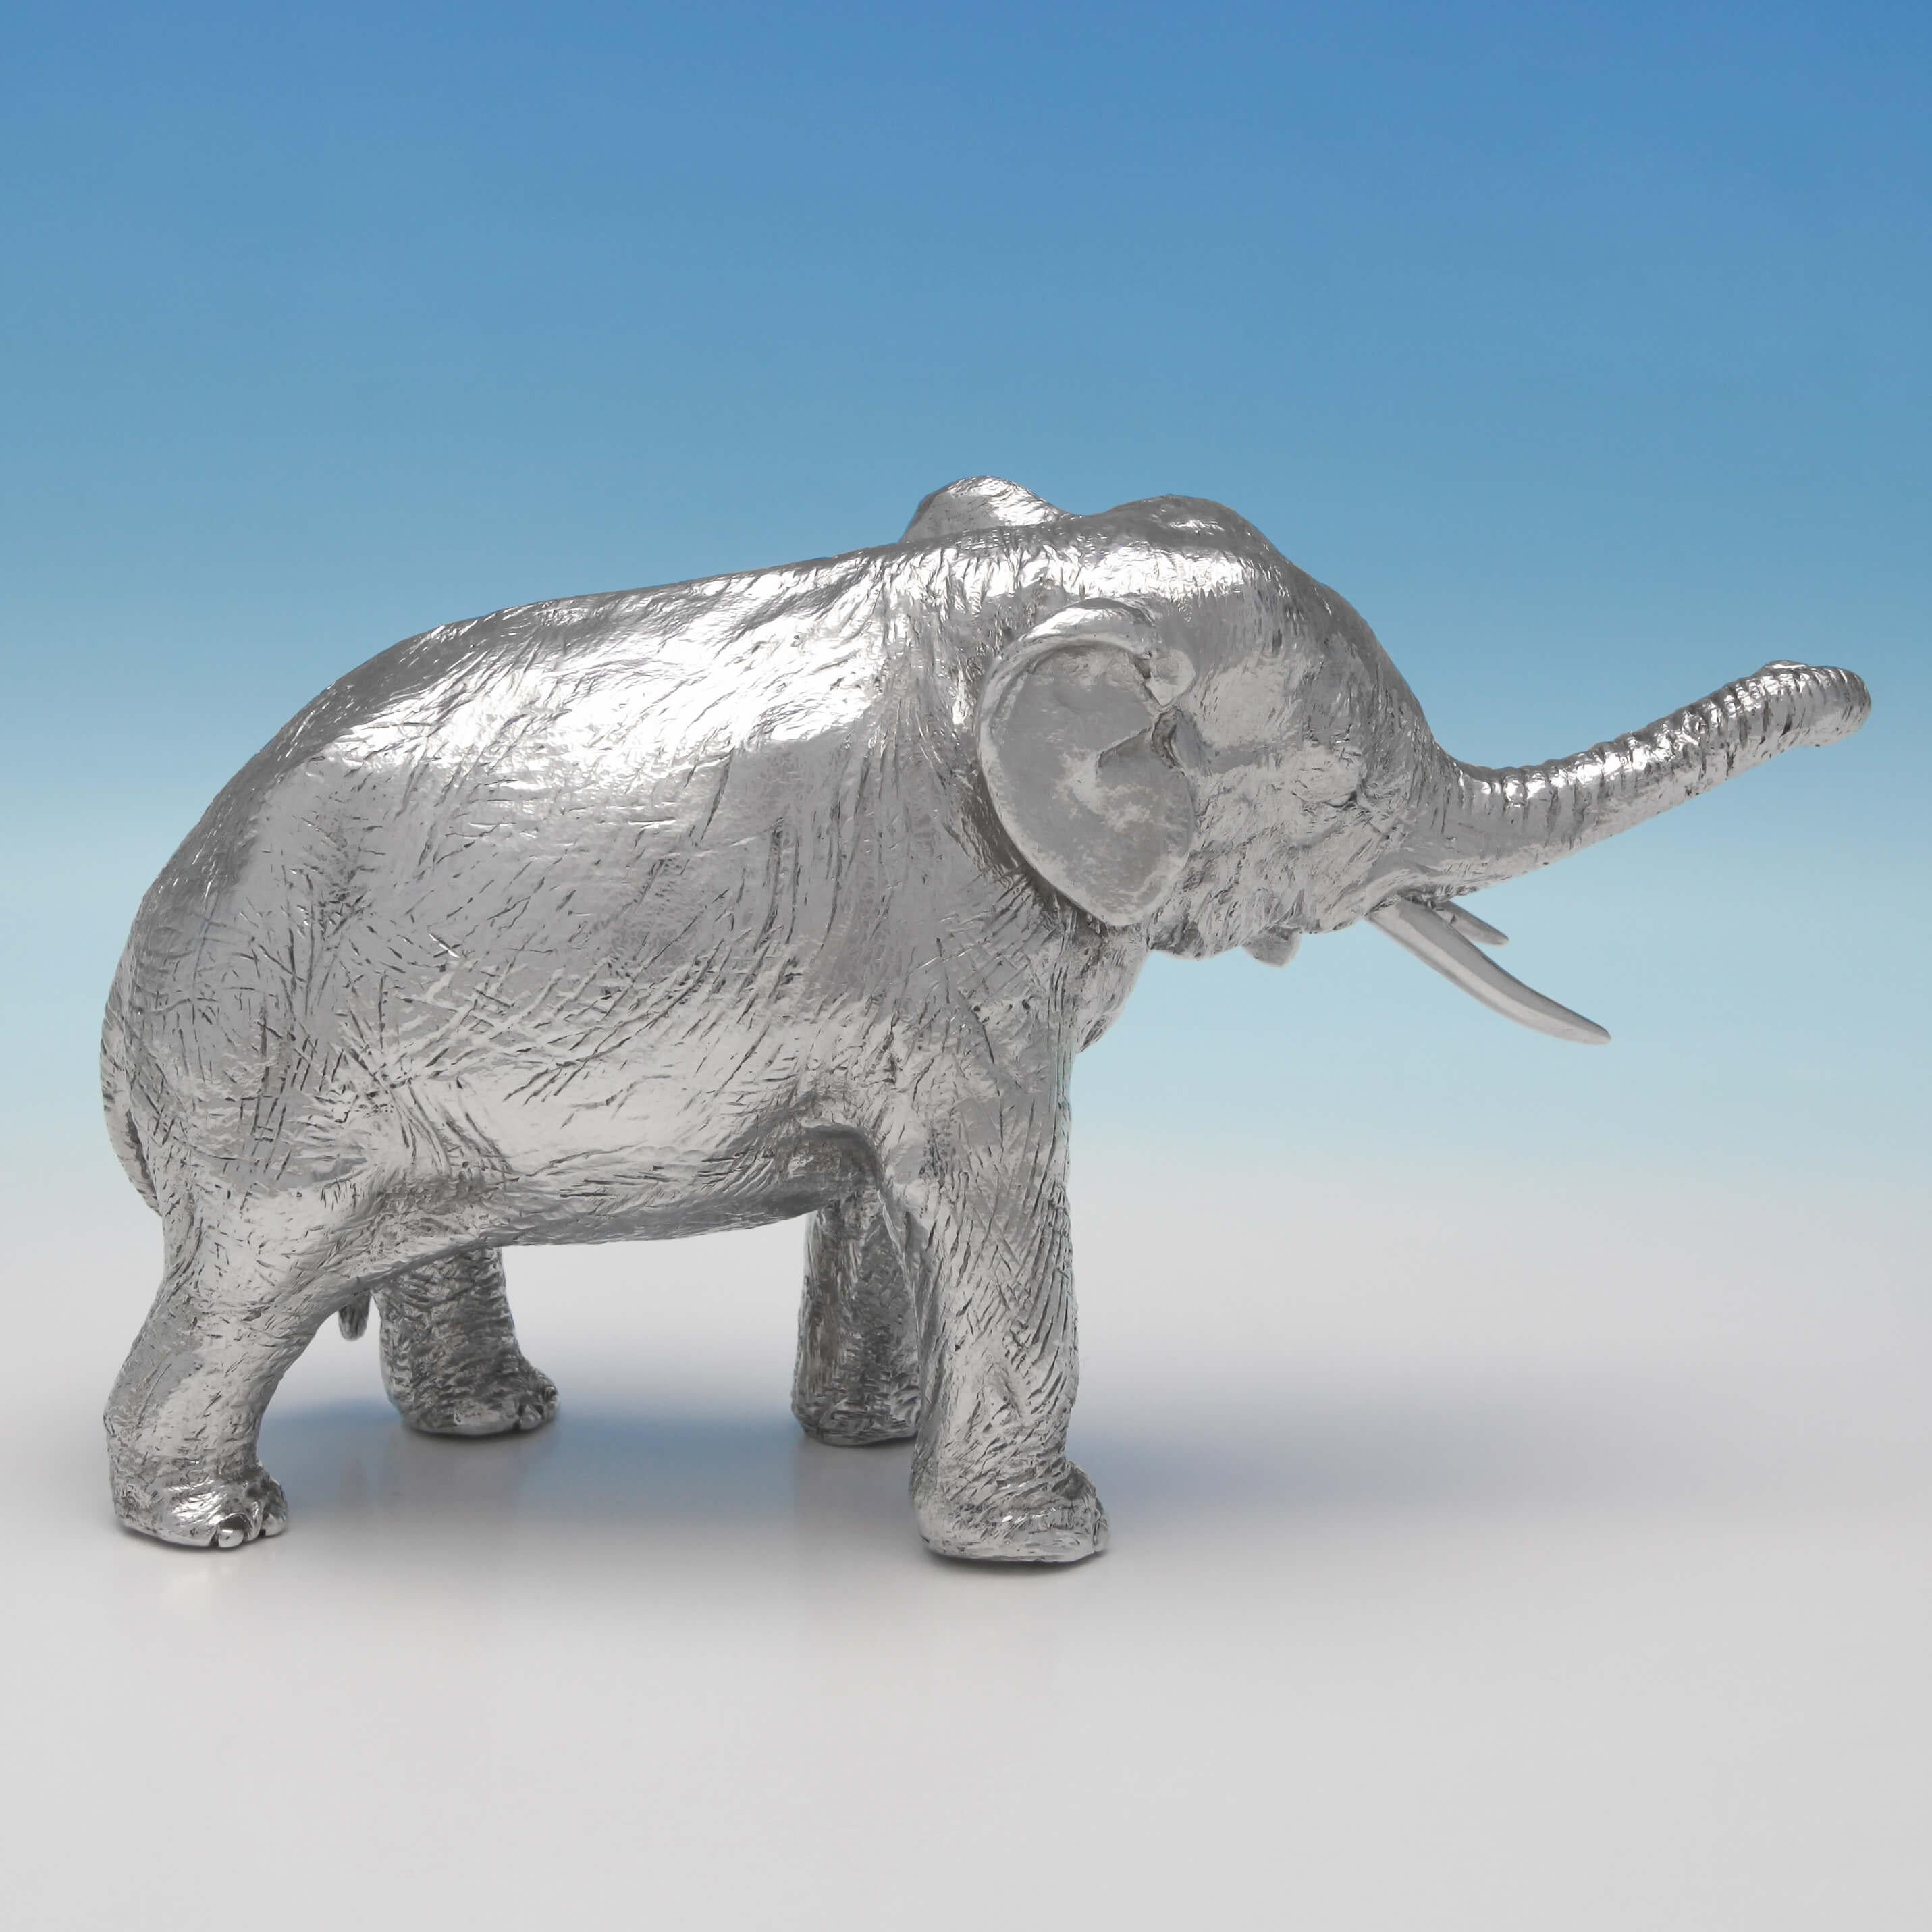 Hallmarked in London in 1973, this handsome, Elizabeth II, sterling silver elephant model, has been realistically cast, with fine detailing. The elephant measures 4.5